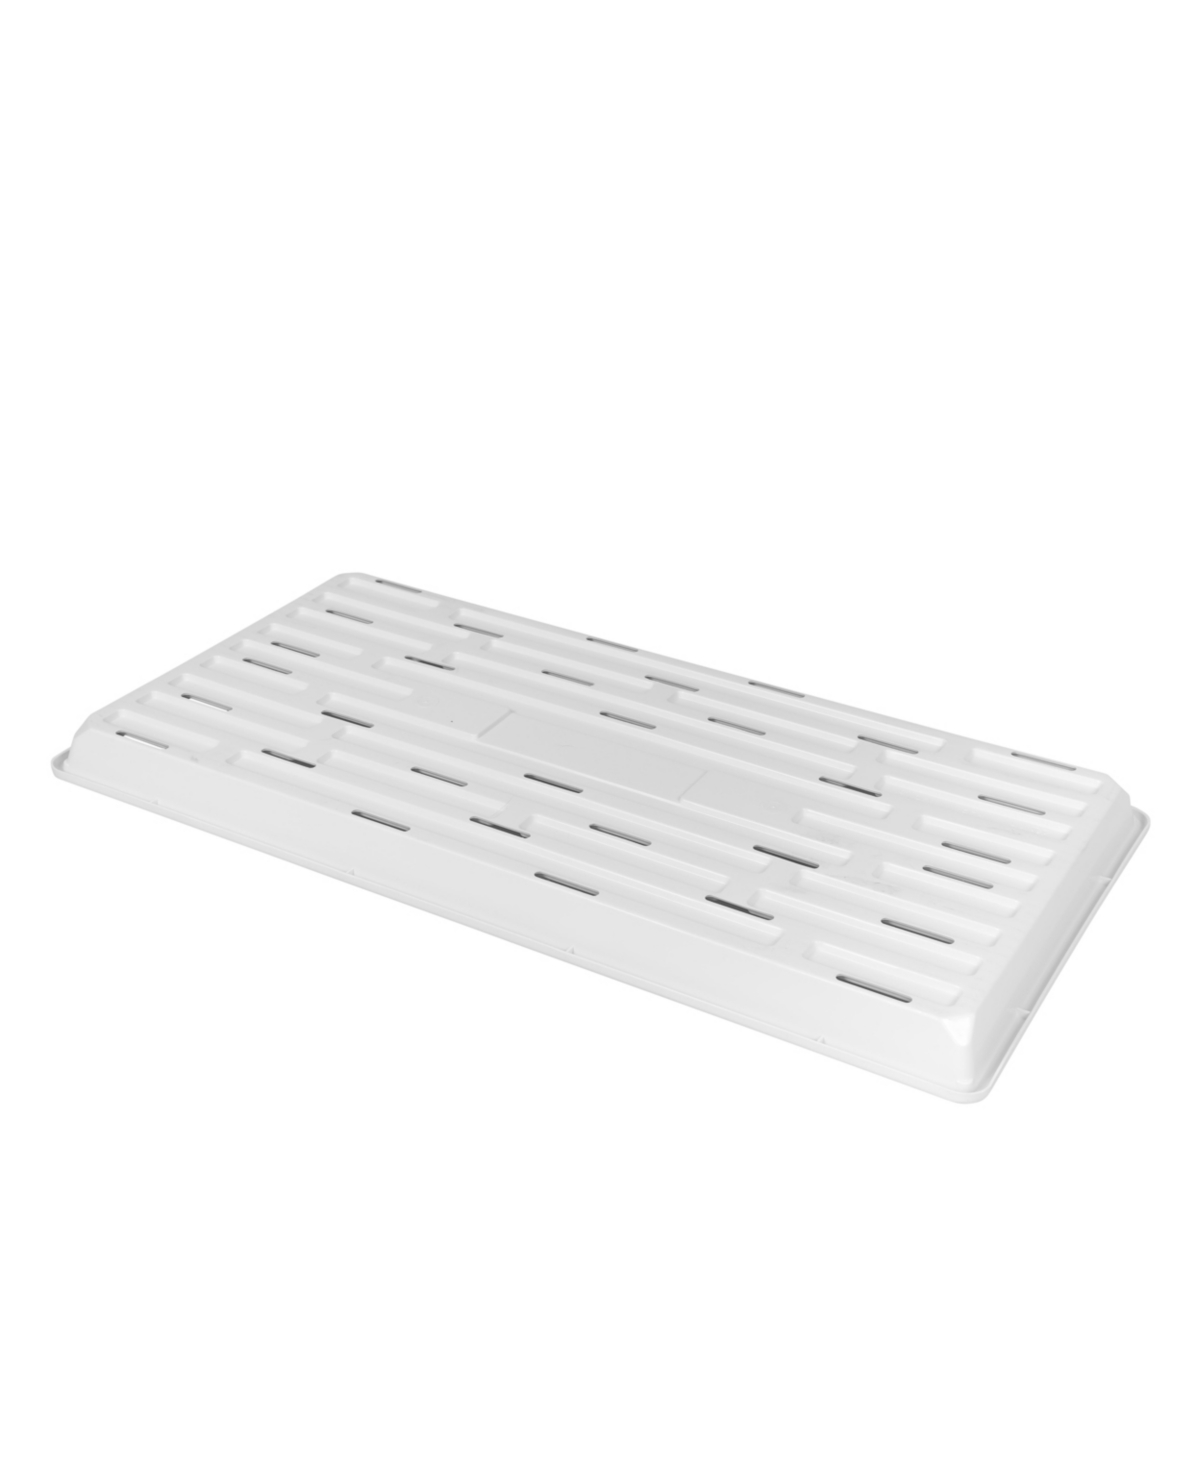 10 x 20in Indoor Gardening Shallow Plastic Seeding Tray, 1in - White